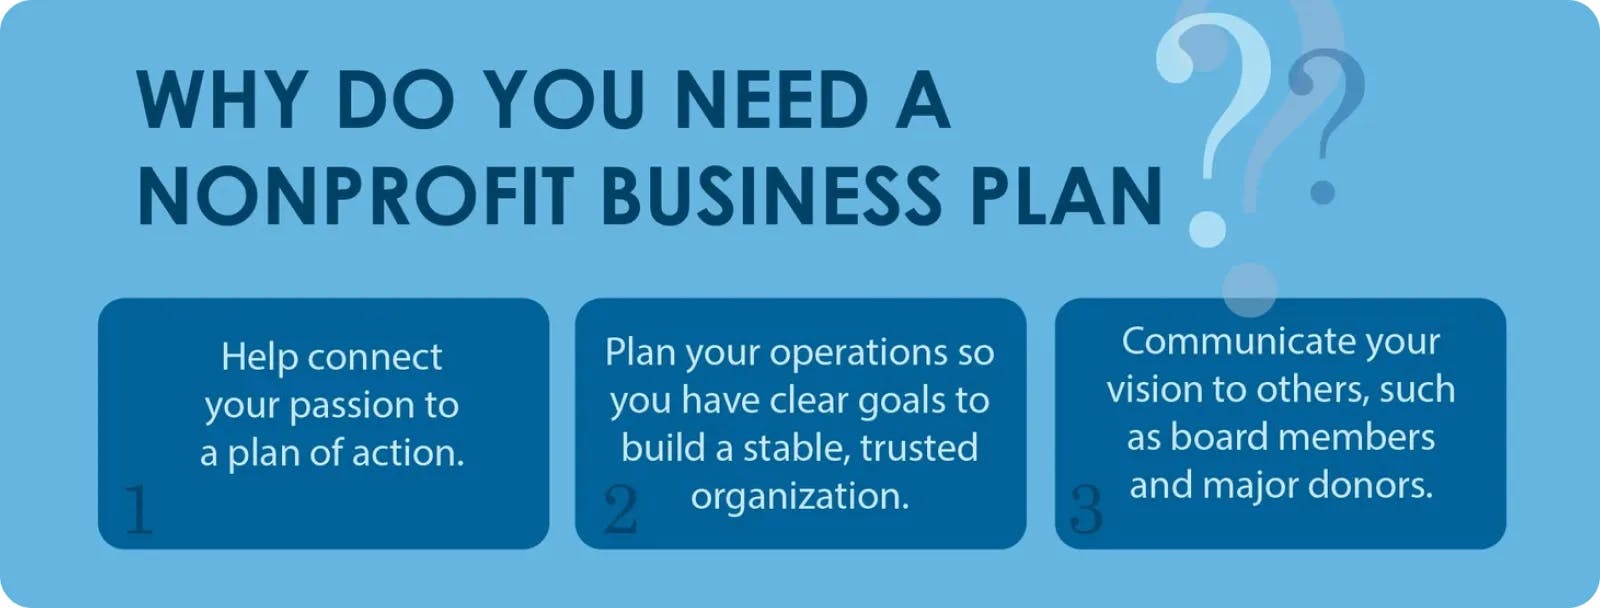 Why do you need a nonprofit business plan?